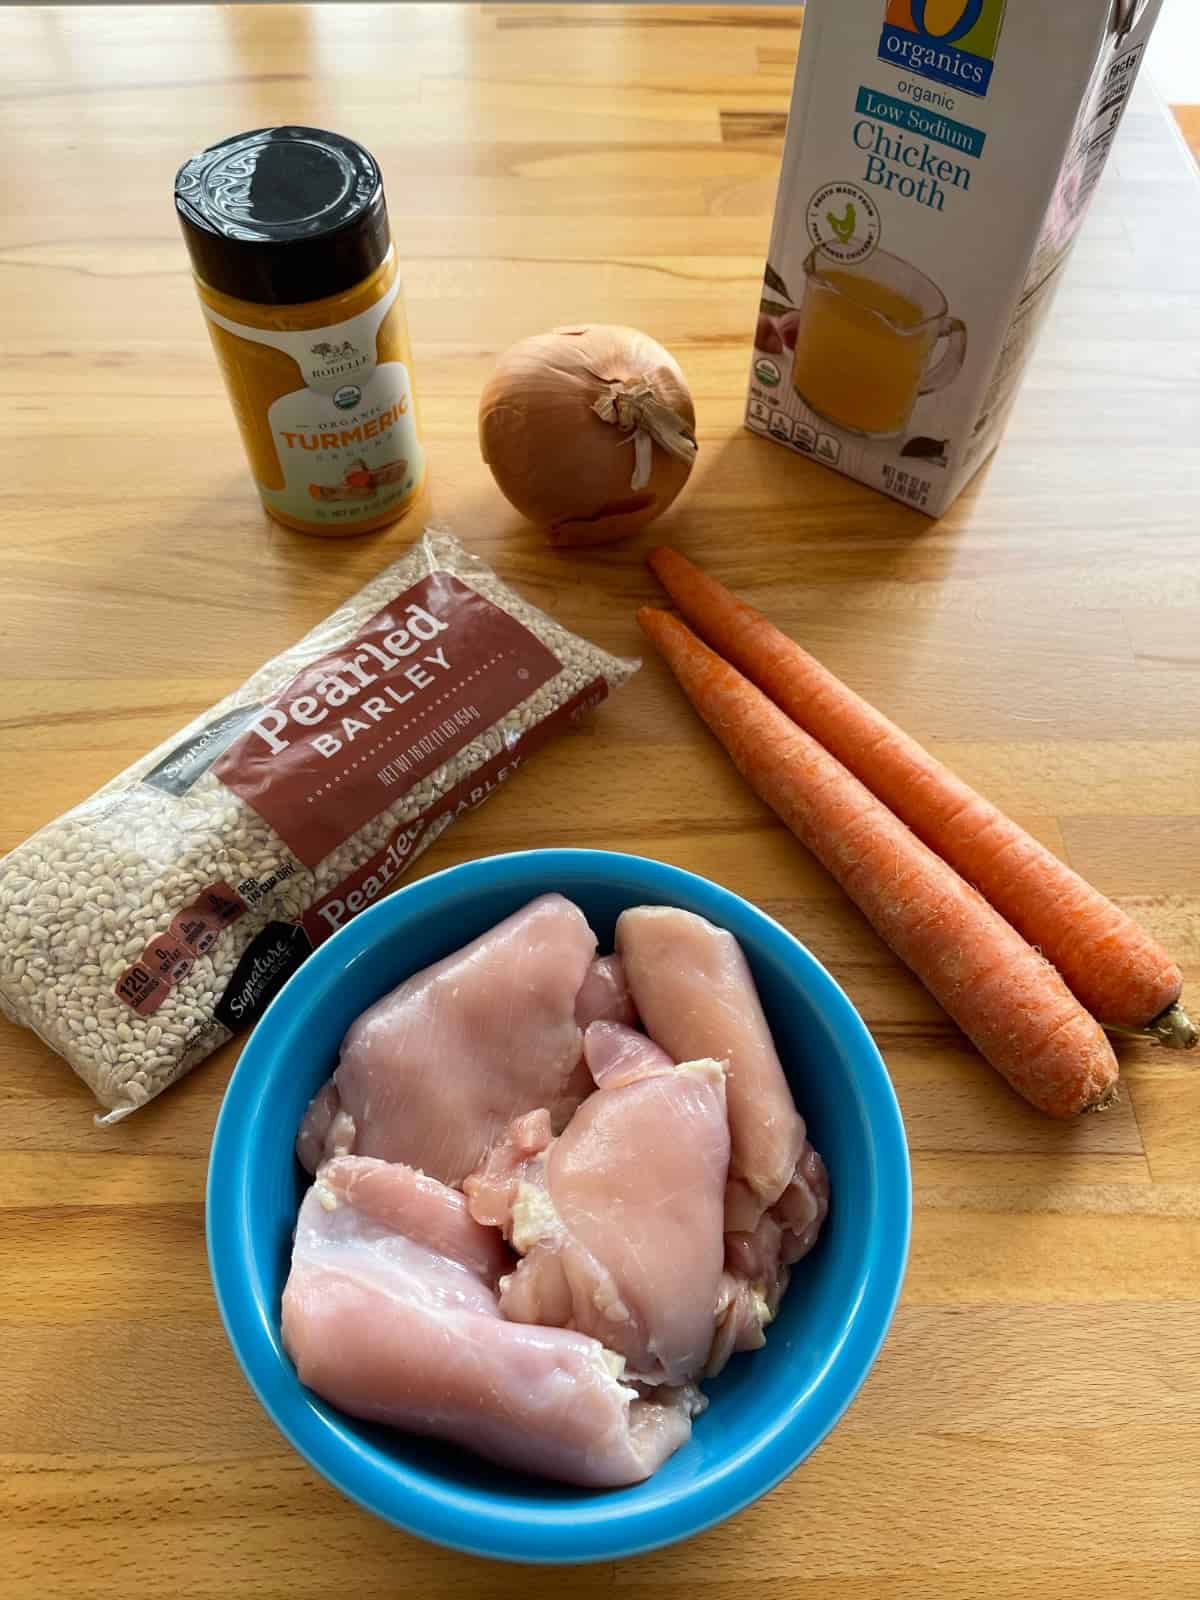 Stew ingredients including ground turmeric, onion, carrots, barley, chicken thighs and chicken broth.